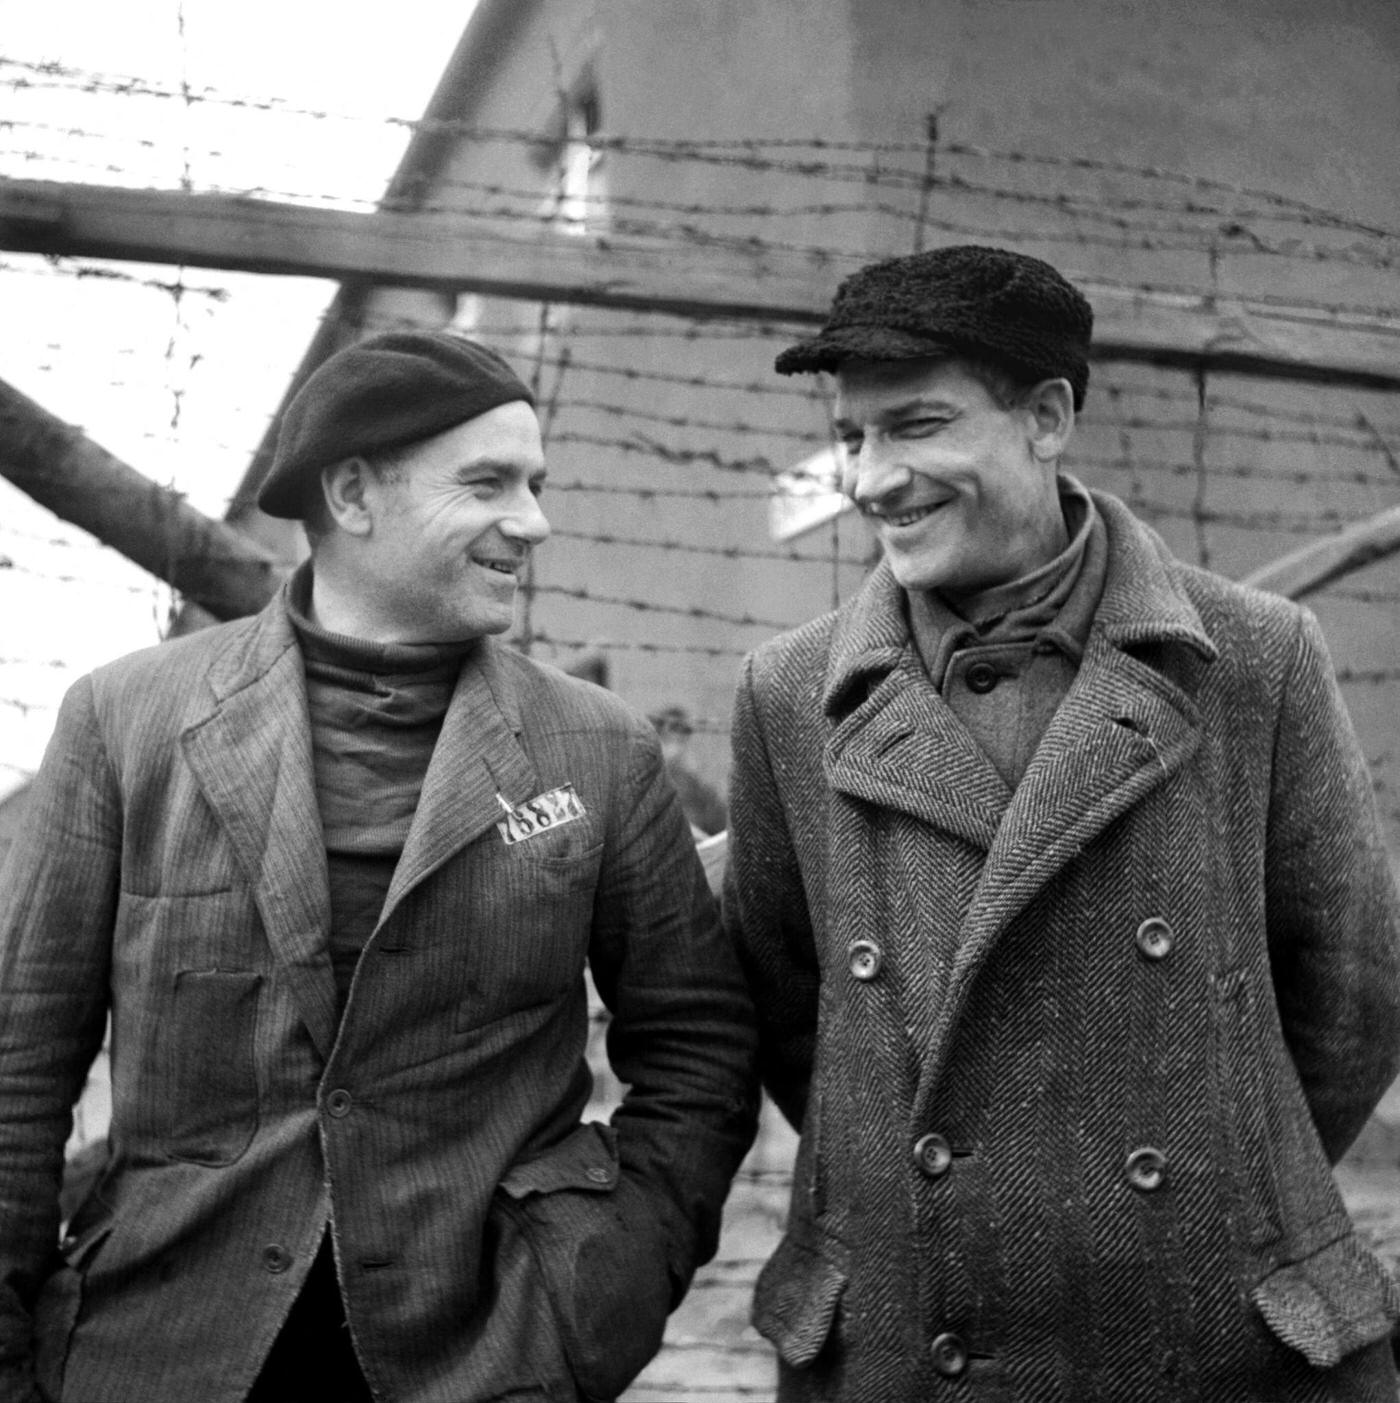 French prisoners Camille Sautereau and commander Bellon joke together in the courtyard of Buchenwald camp after its liberation in April 1945.